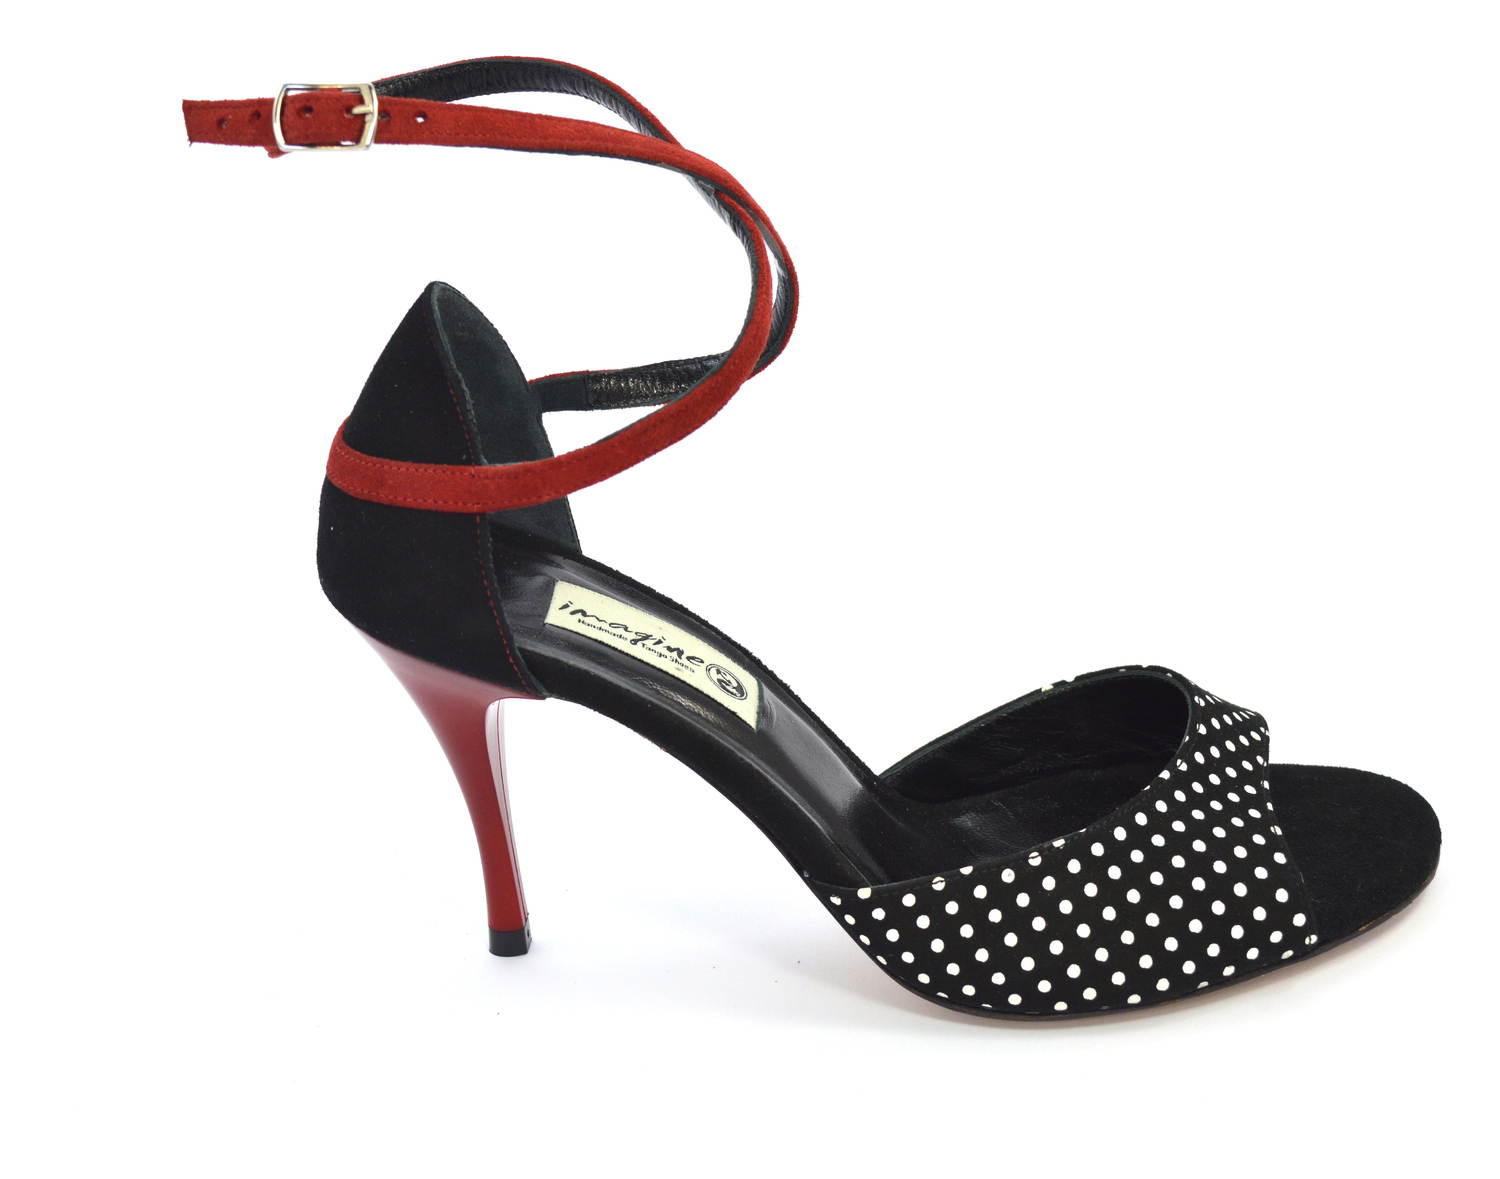 Women's Tango Shoe, with white polka dots and black-red suede leather.